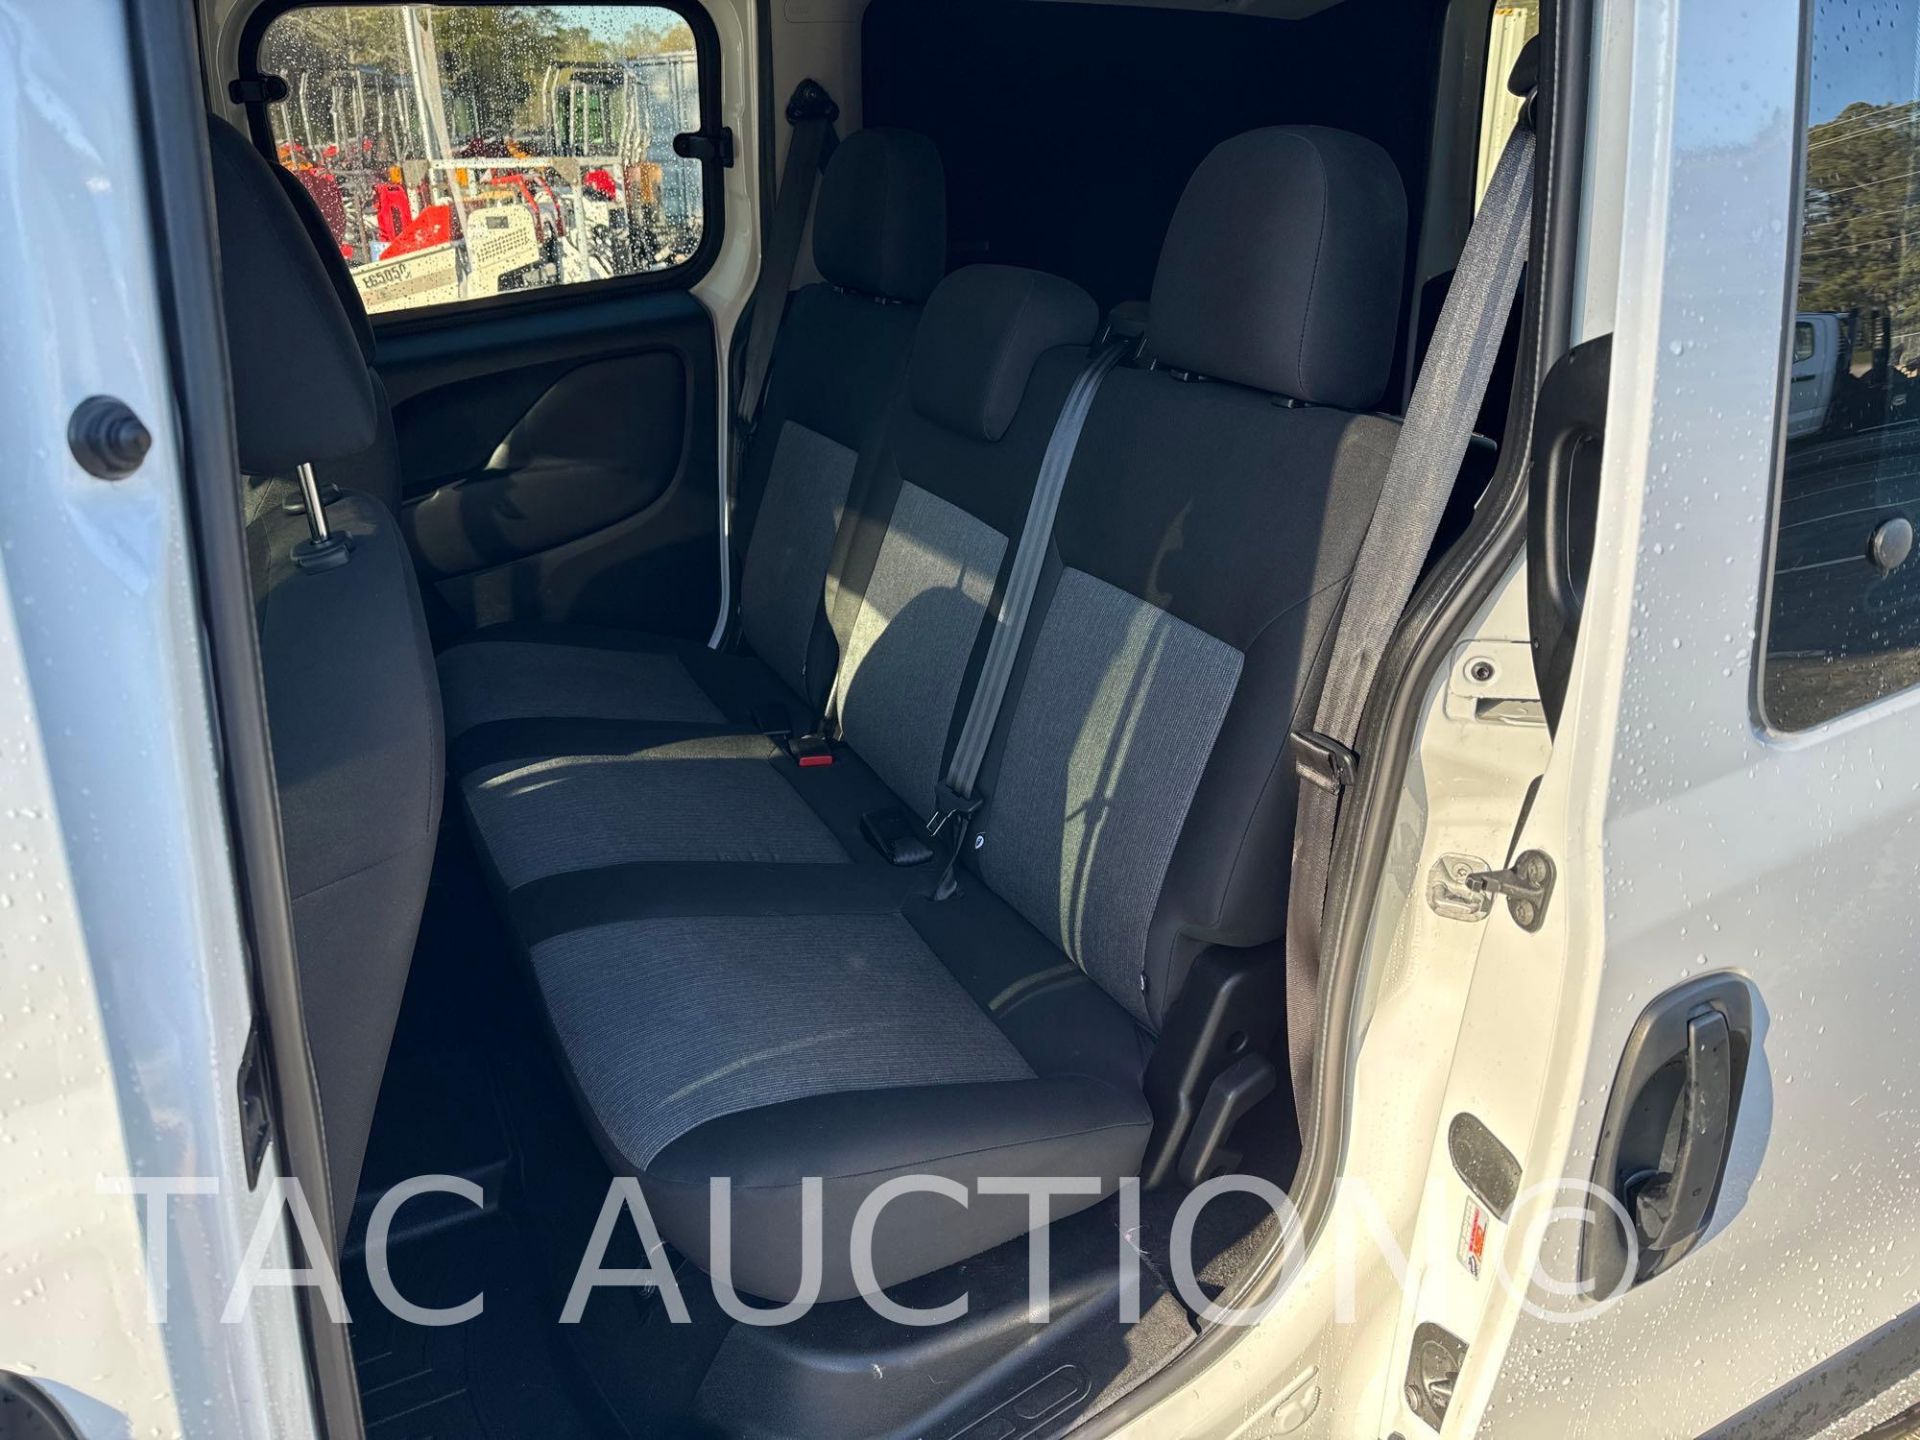 2022 Ram ProMaster City 2500 Climate Controlled Sprinter Van - Image 25 of 45